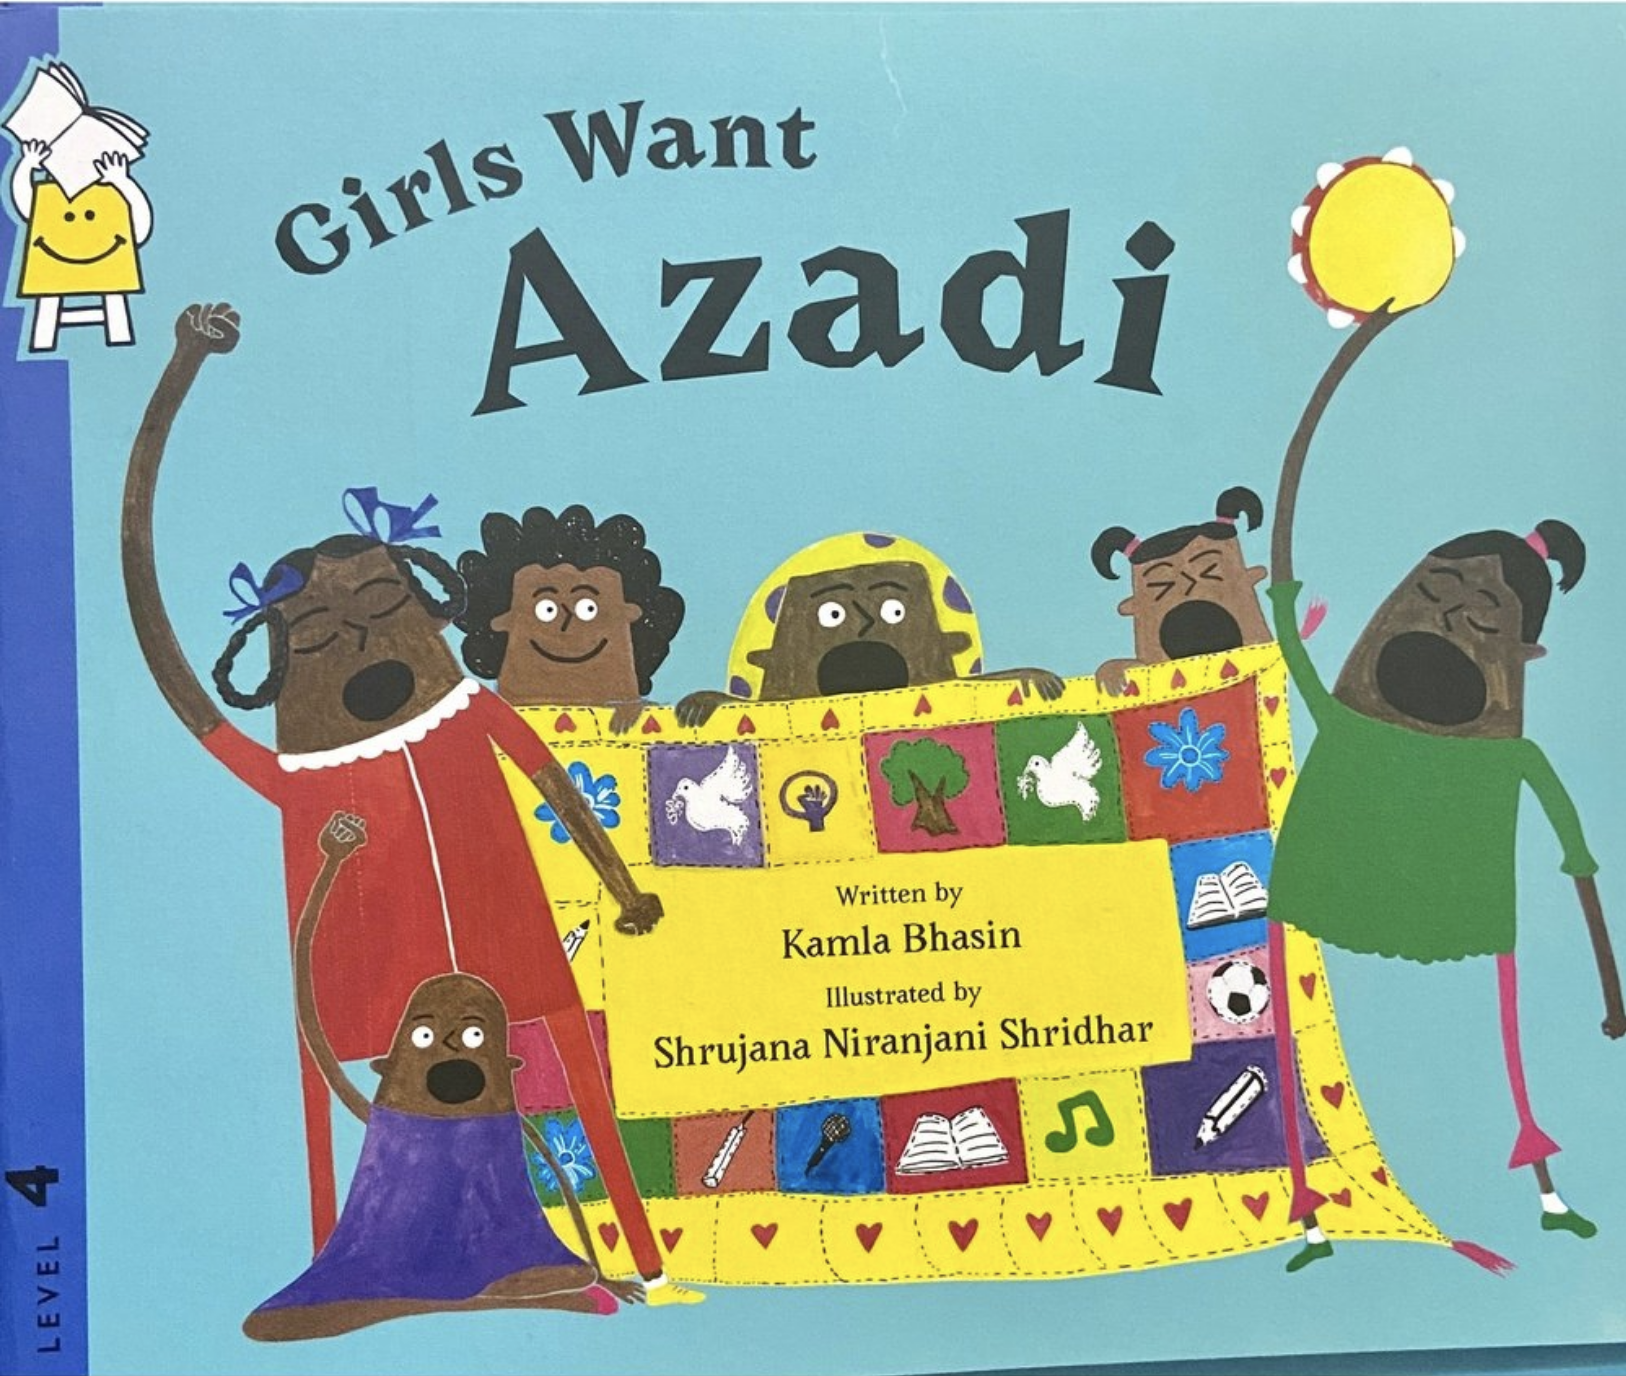 Cover for Girls Want Azadi featuring an illustration of six kids who are all singing or smiling with one holding a tambourine and one with their eyes close and arm outstretched. Three of the kids are holding a colorful quilted yellow blanket with the author and translator information in the center. The cover's background is light teal and there is a darker blue border along the left side of the book.